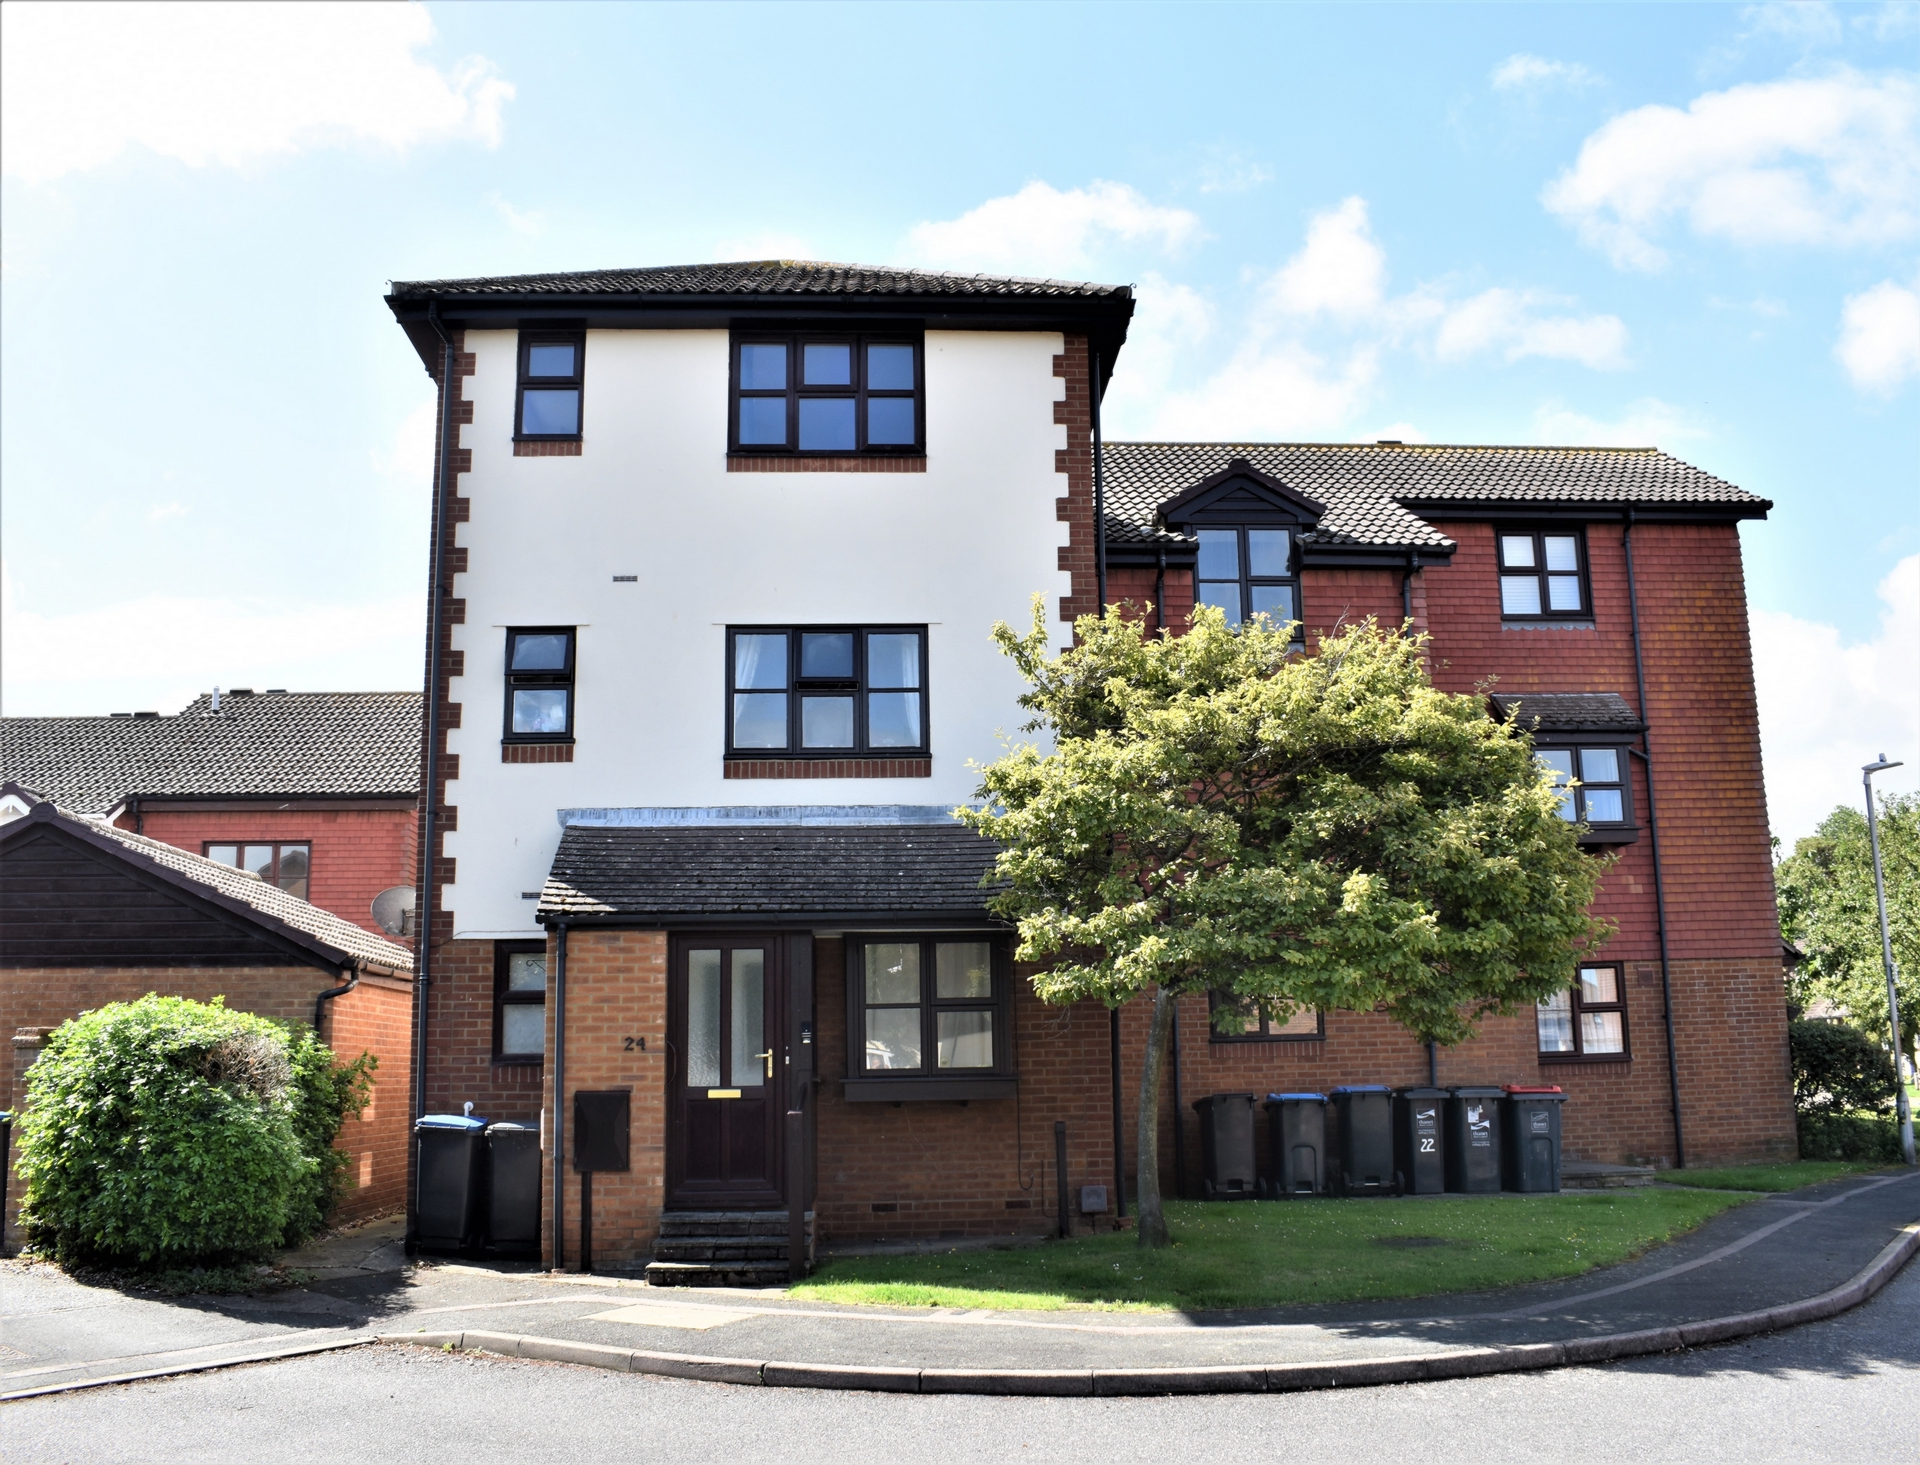 1 bed flat for sale in Brandon Way, Birchington - Property Image 1